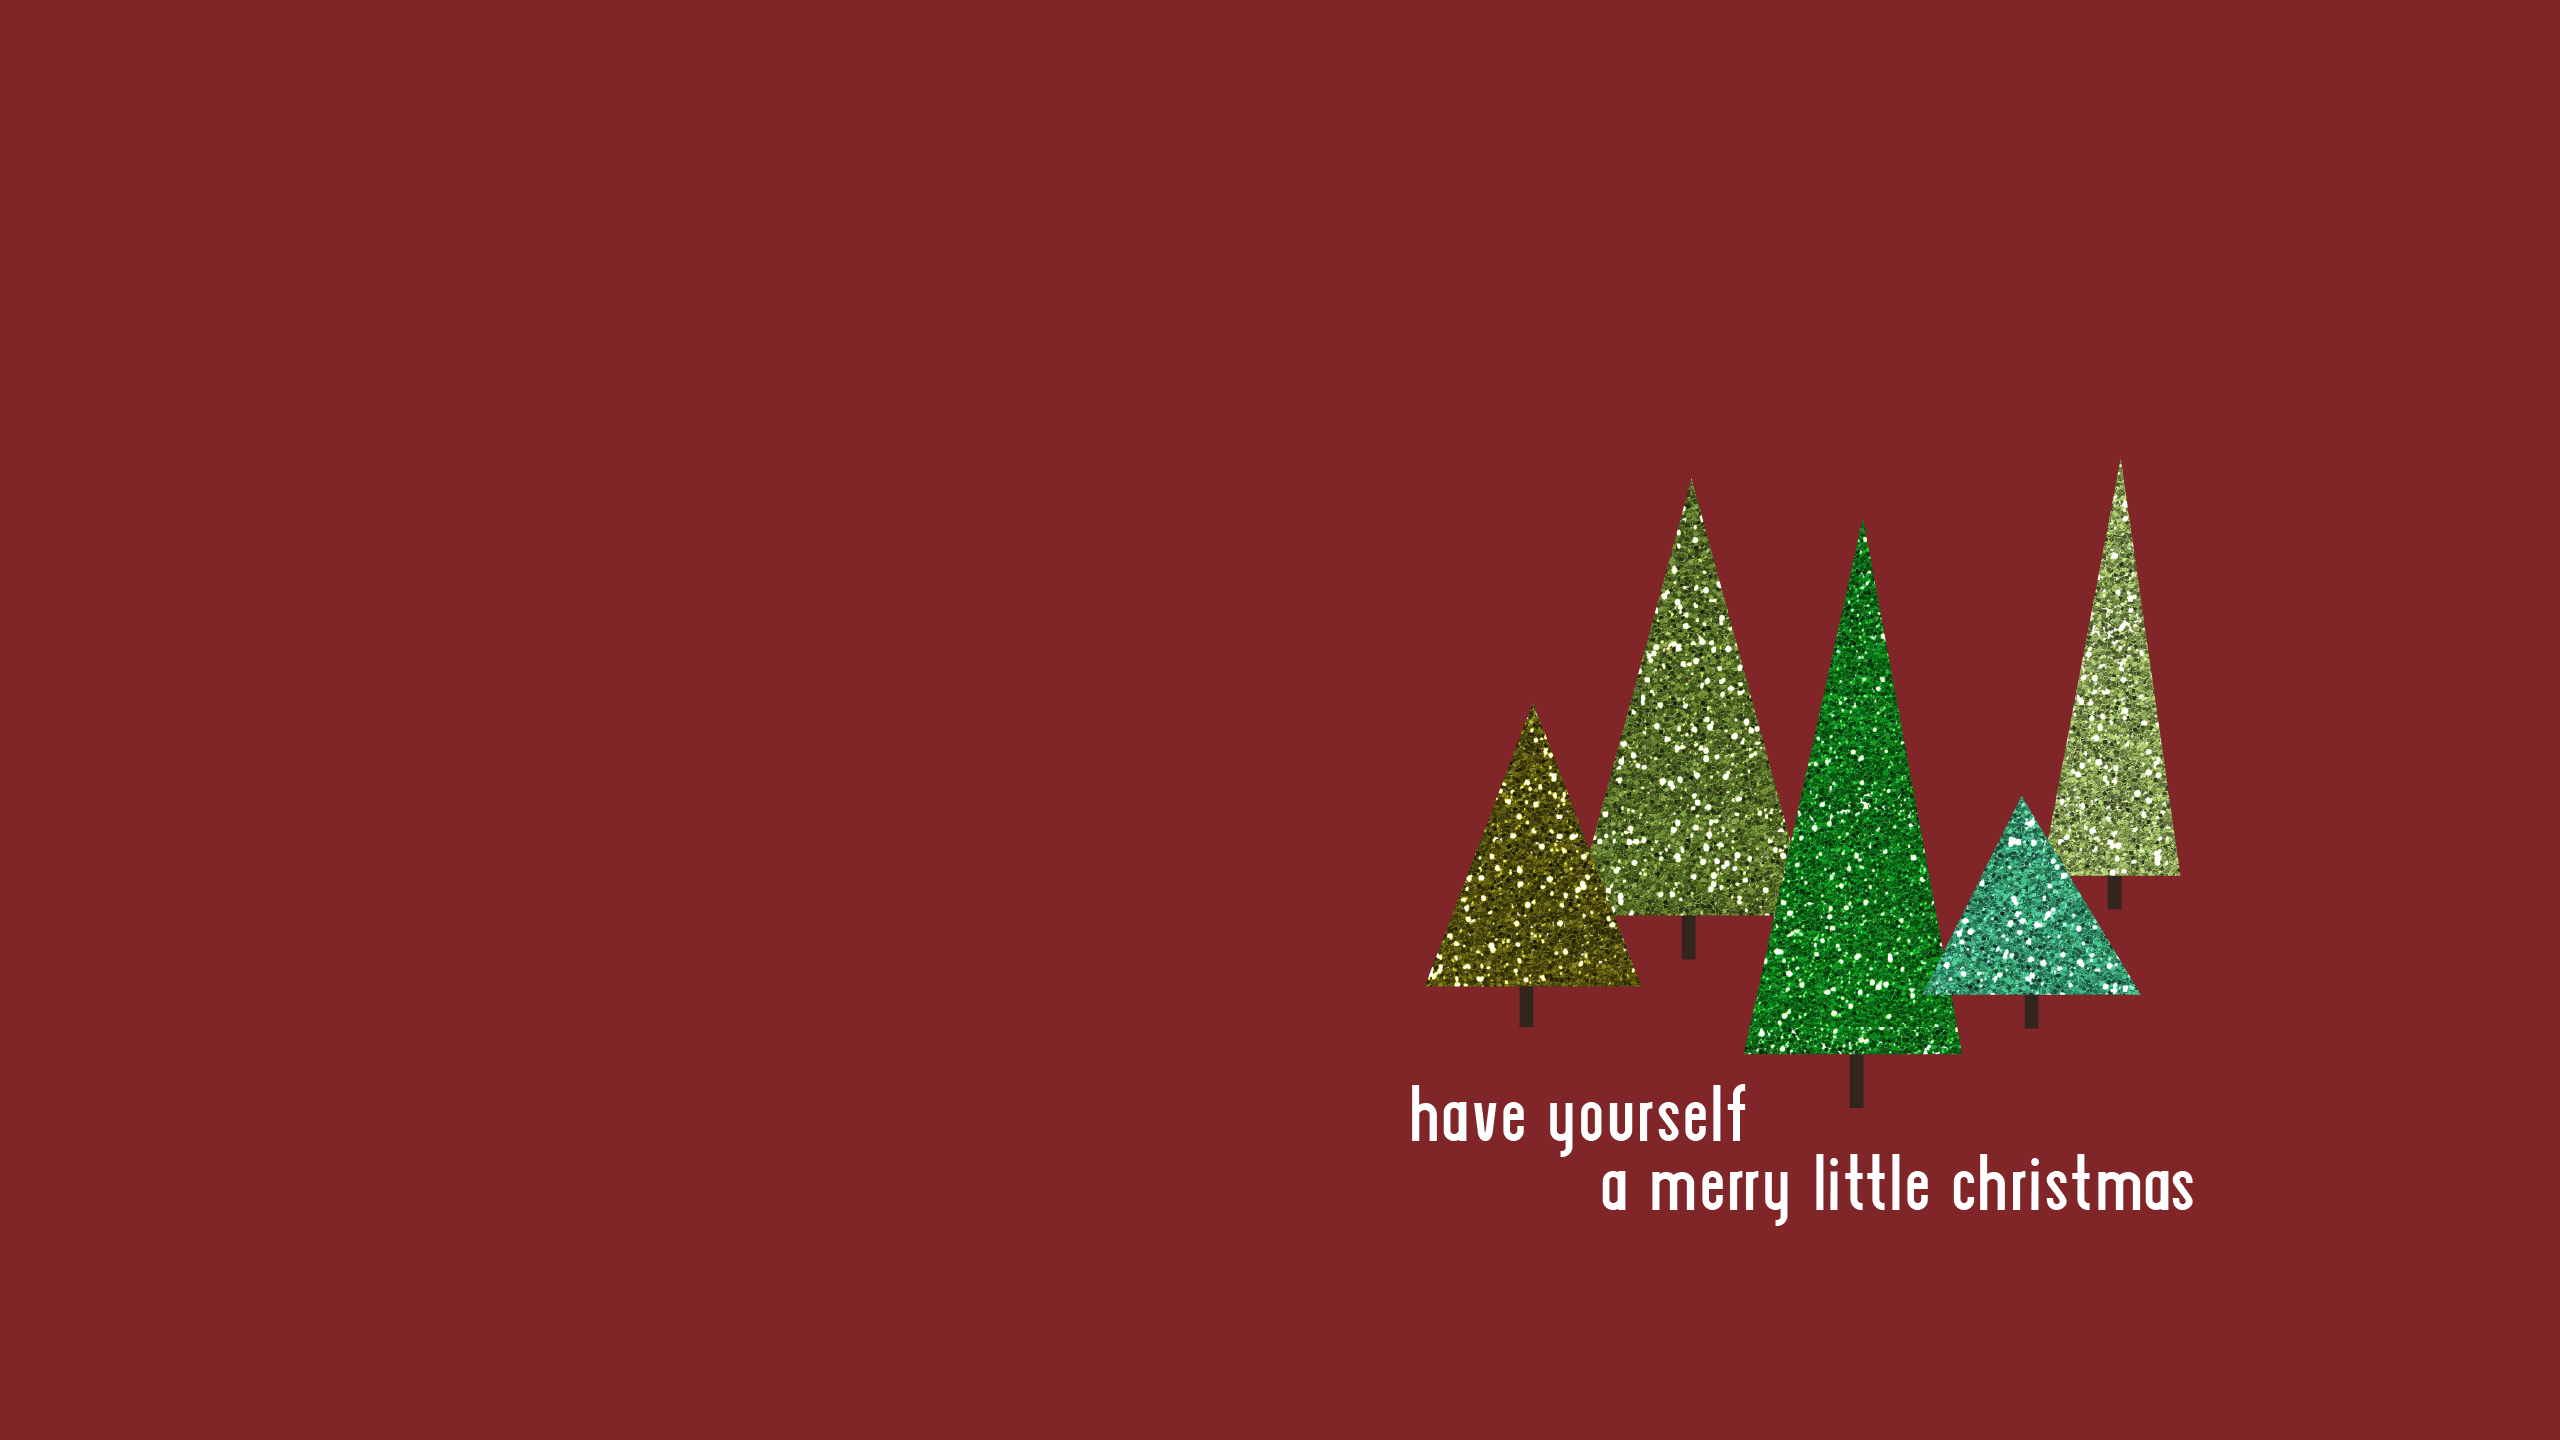 Free Download - Christmas Computer Desktop & iPhone Backgrounds | Ruby ...